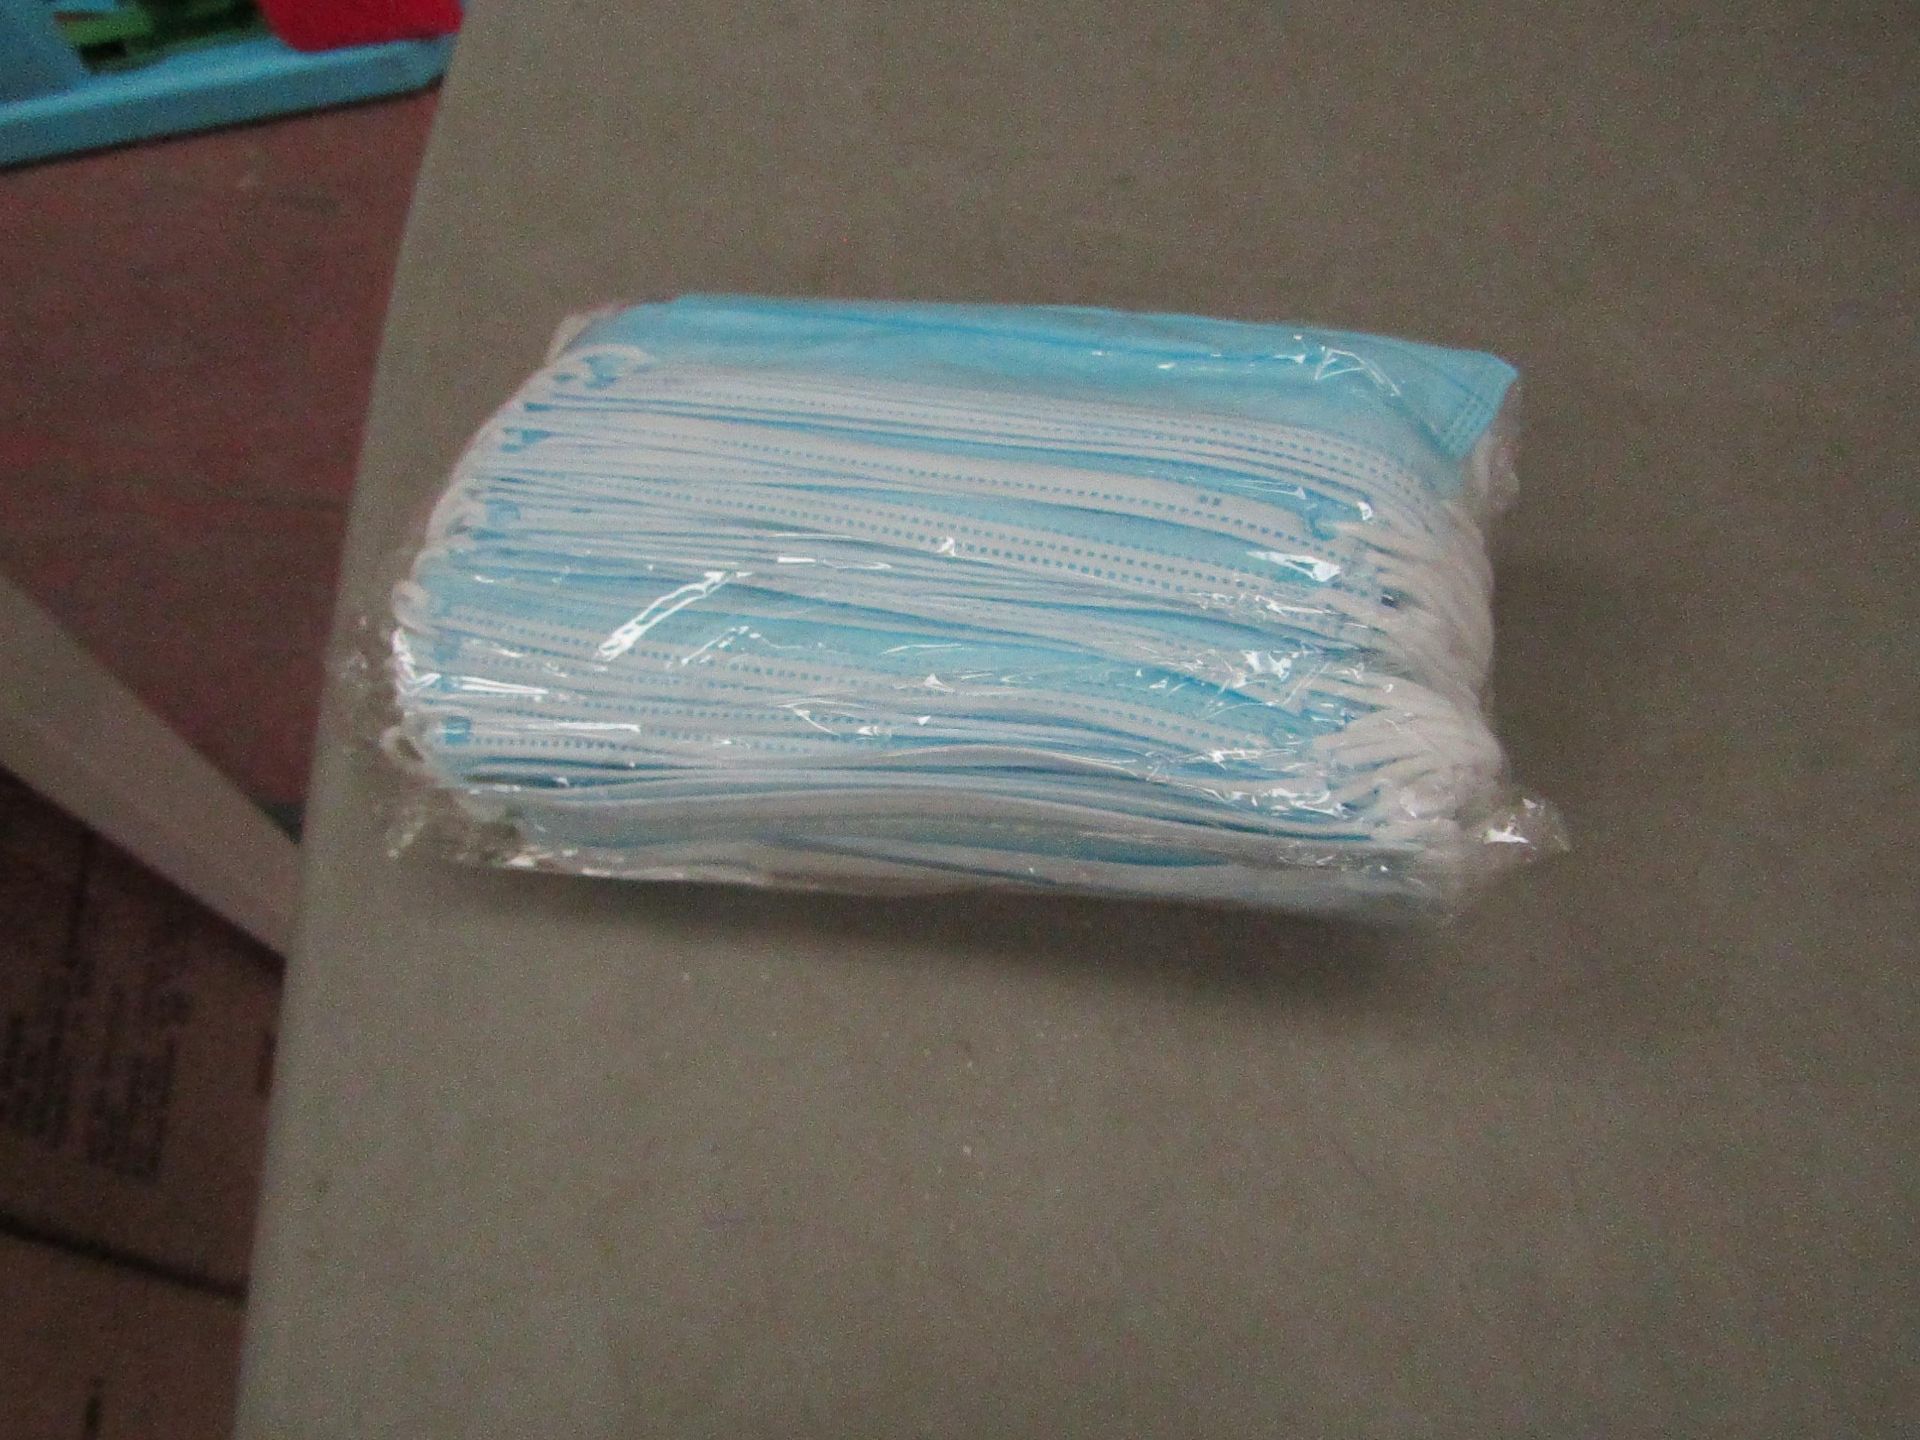 Pack of 50 x Disposable Face Masks. New & Packaged